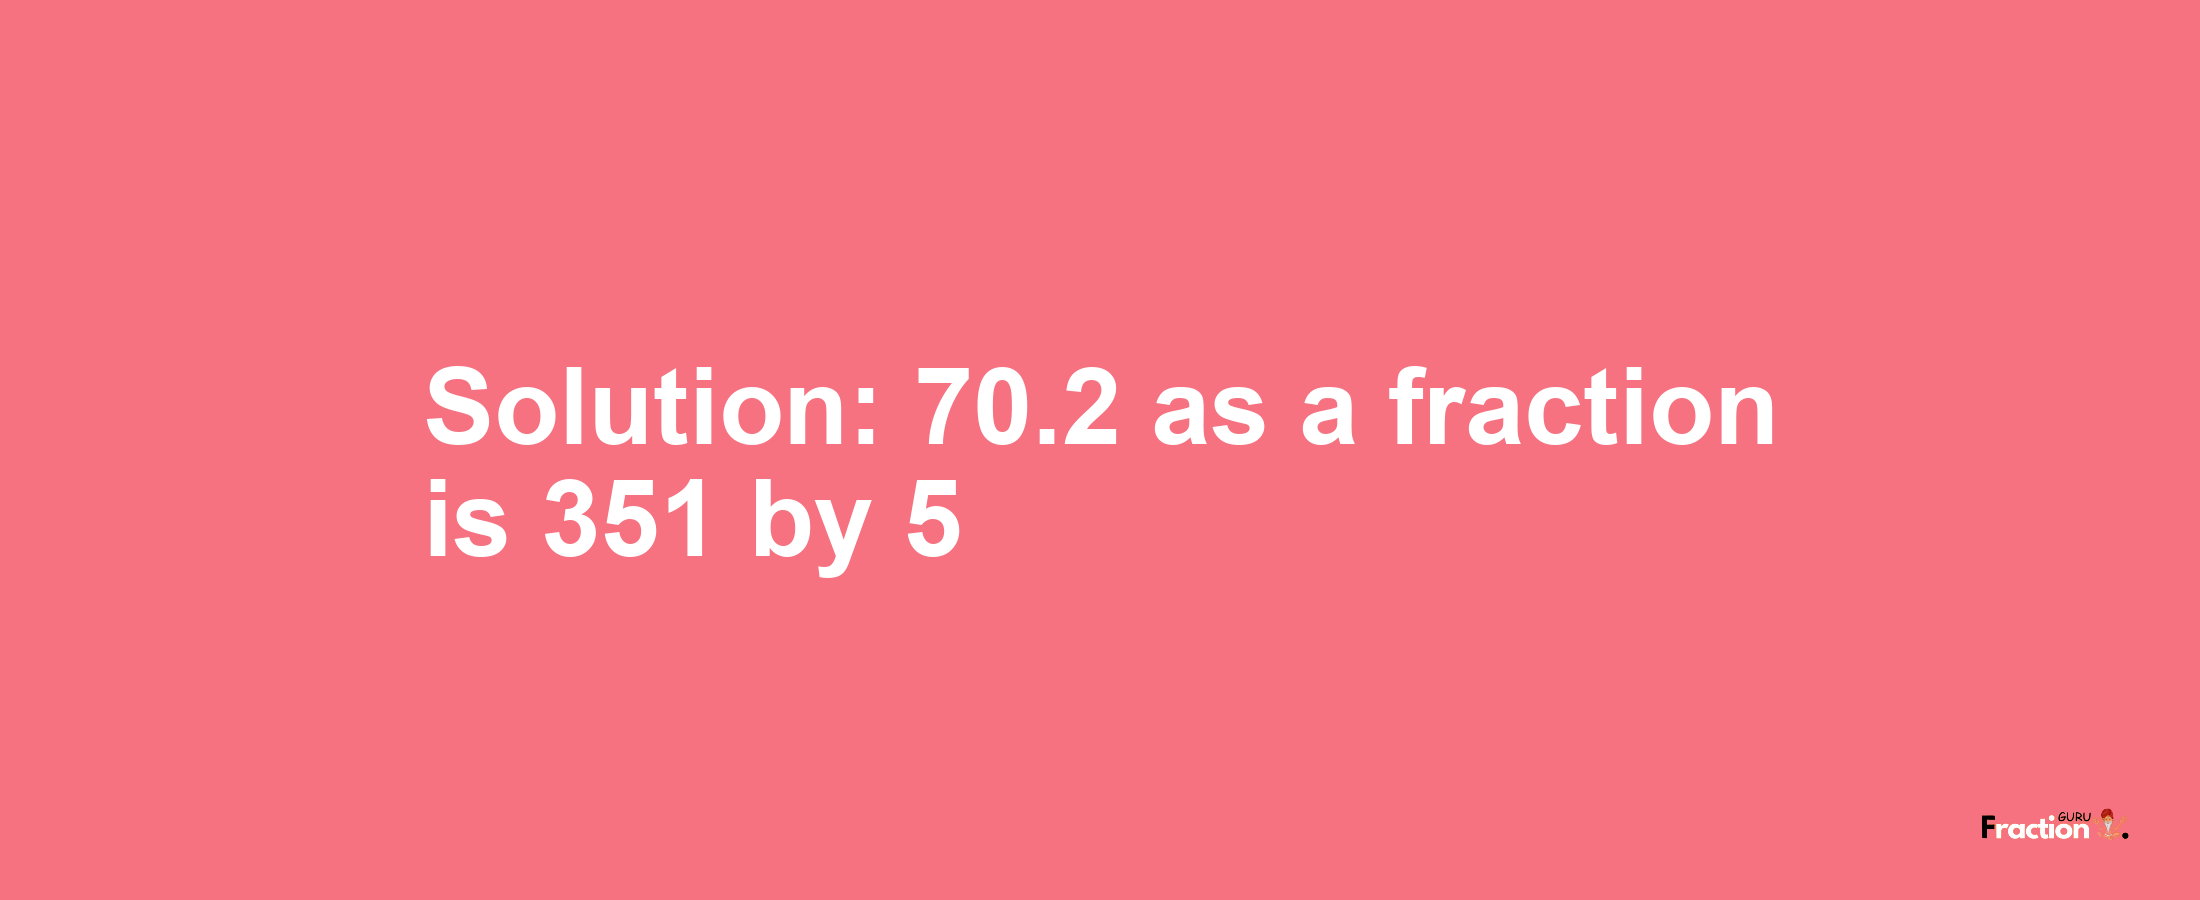 Solution:70.2 as a fraction is 351/5